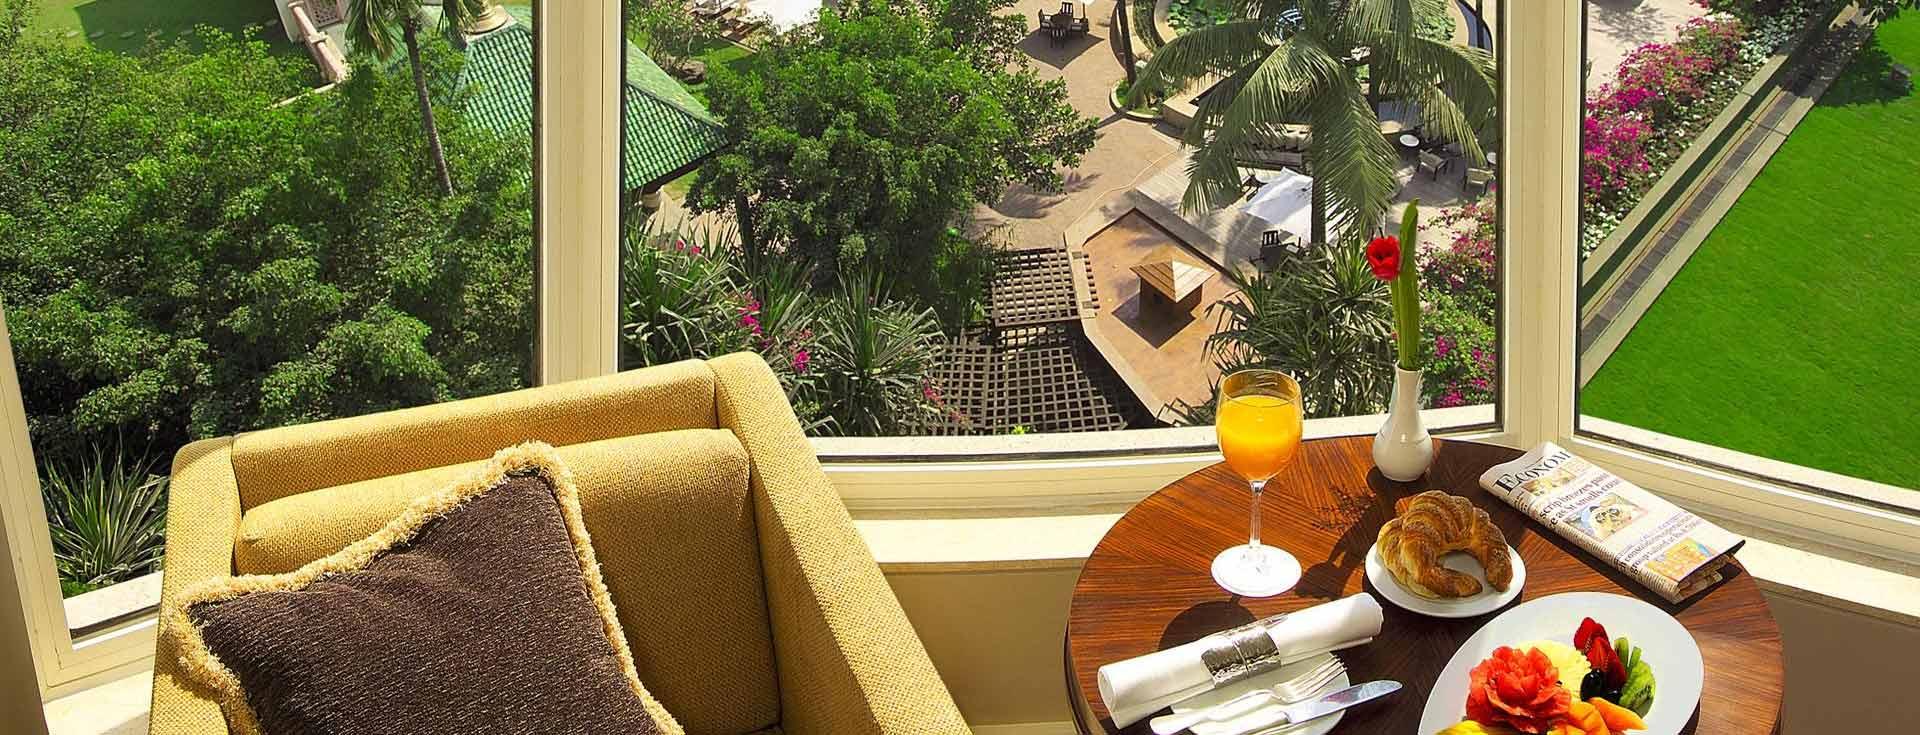 Bed and Breakfast offer at The Leela Mumbai